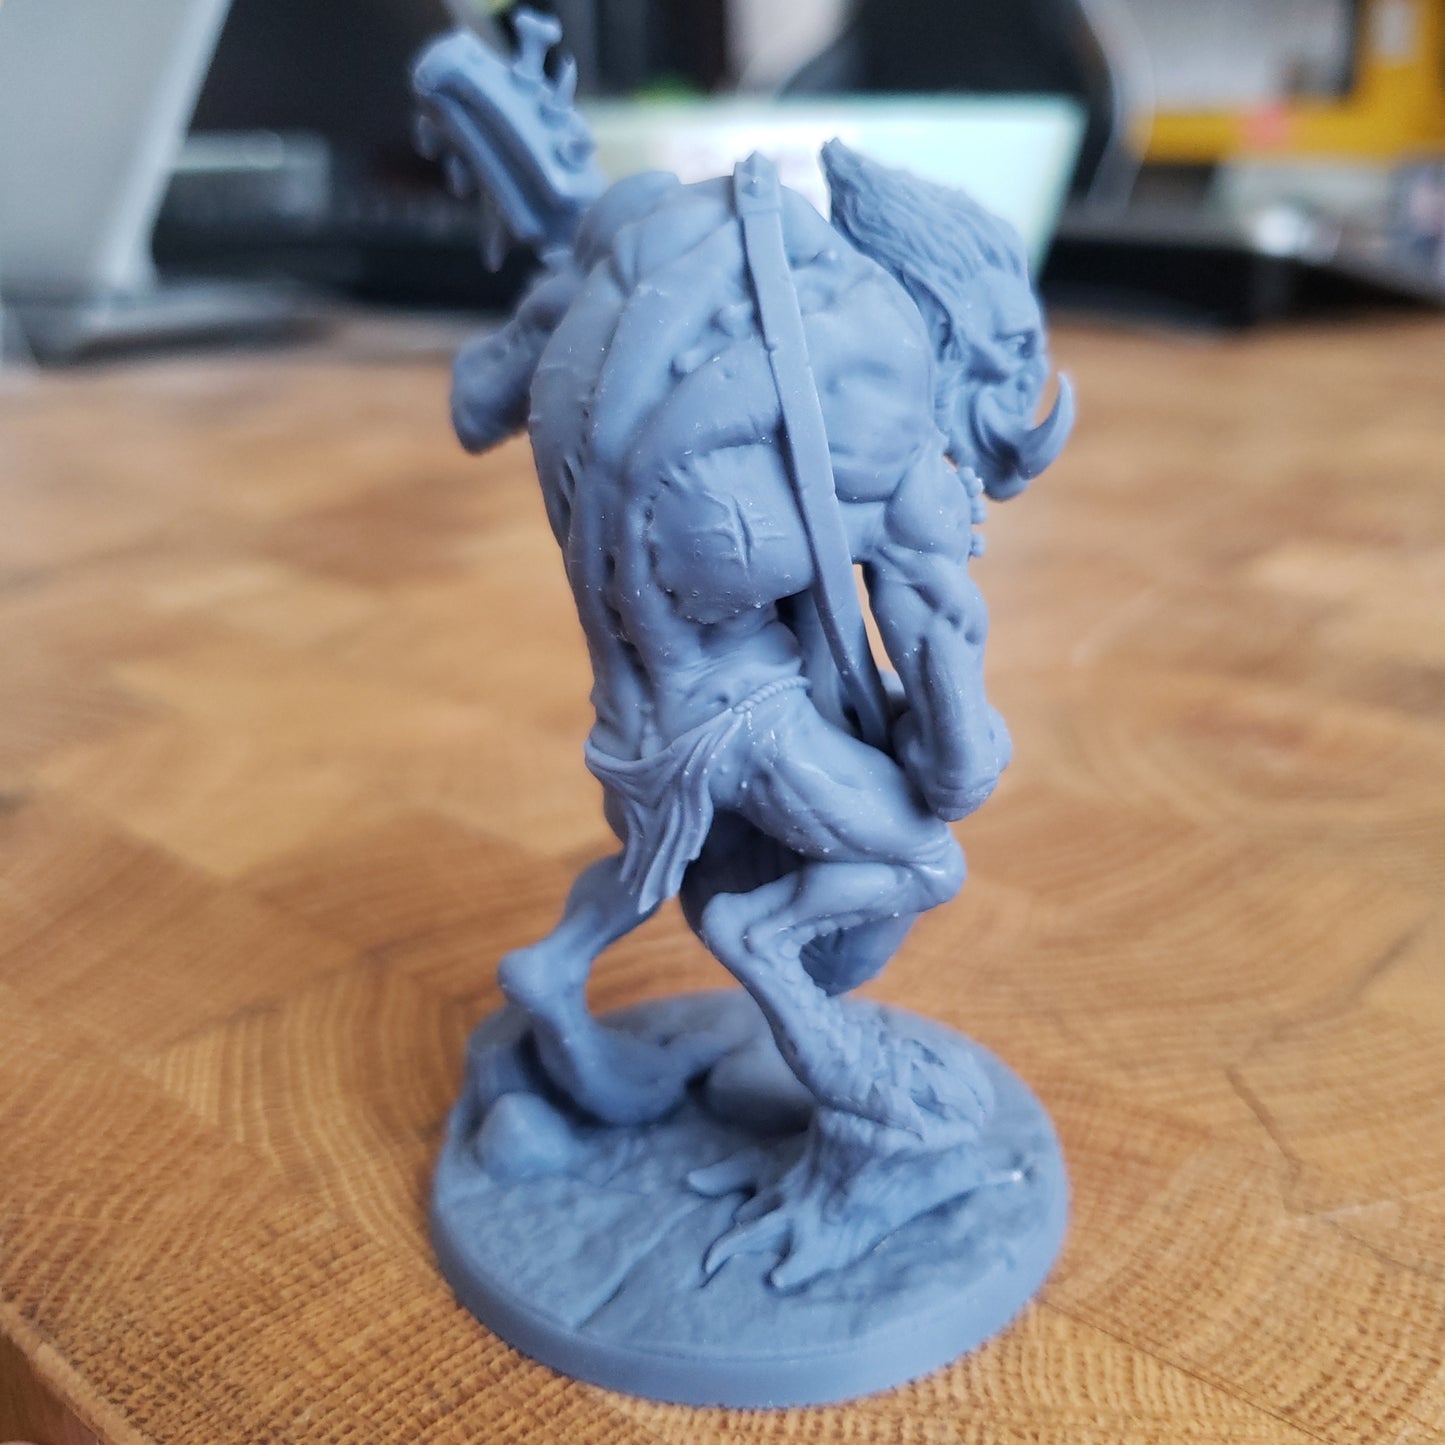 Image shows an example of a 3D printed troll guitarist gaming miniature printed in-house at All Systems Go